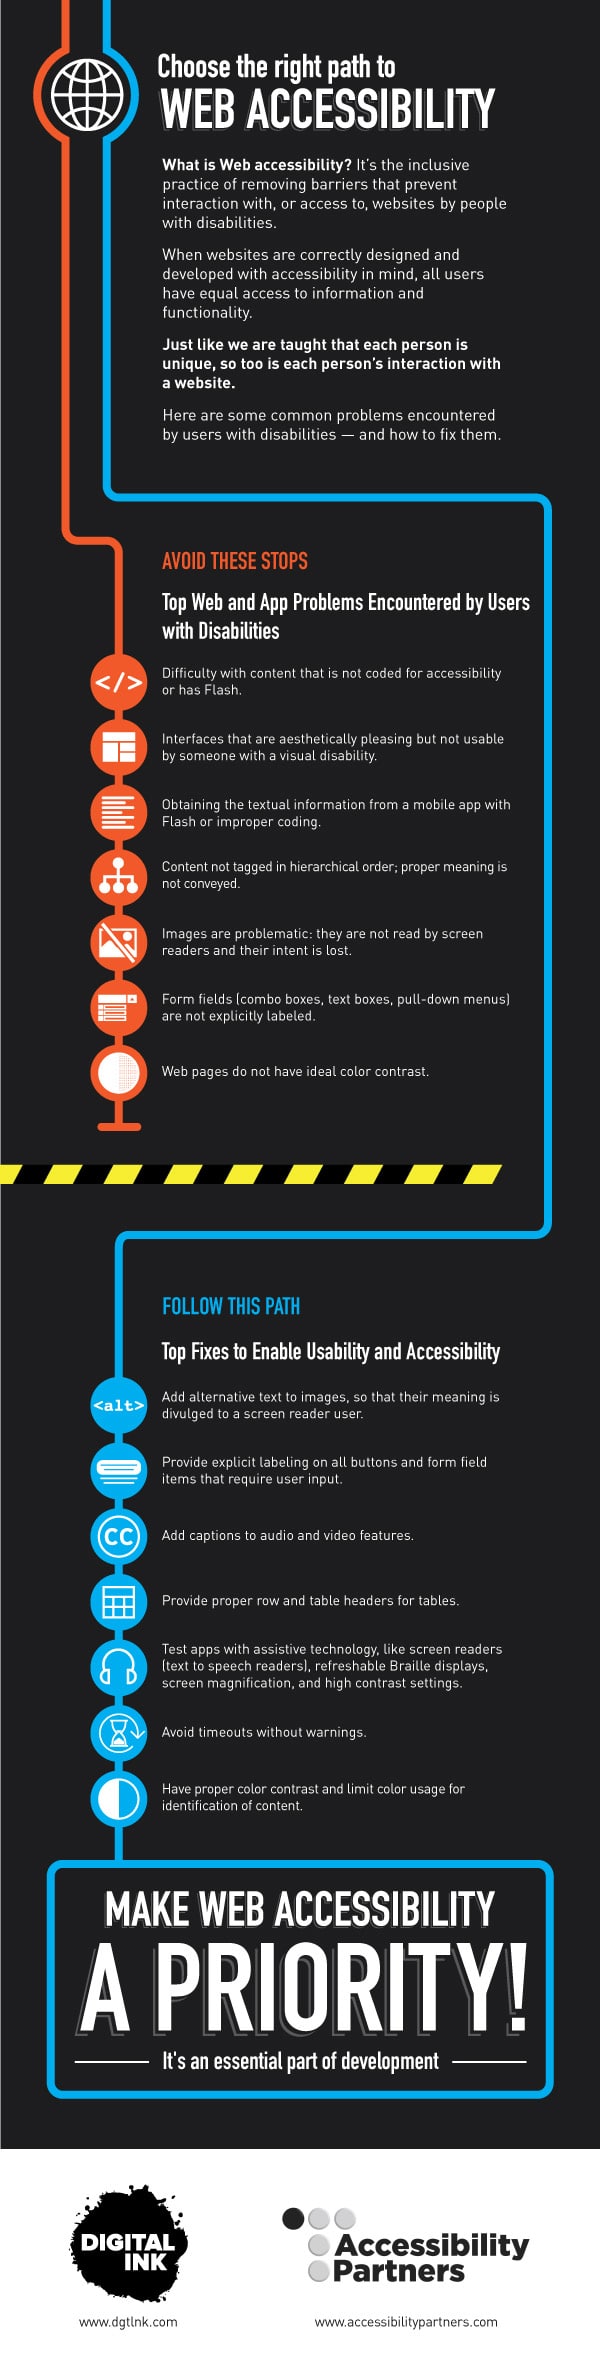 Choose the Right Path to Web Accessibility. Full text below in post.